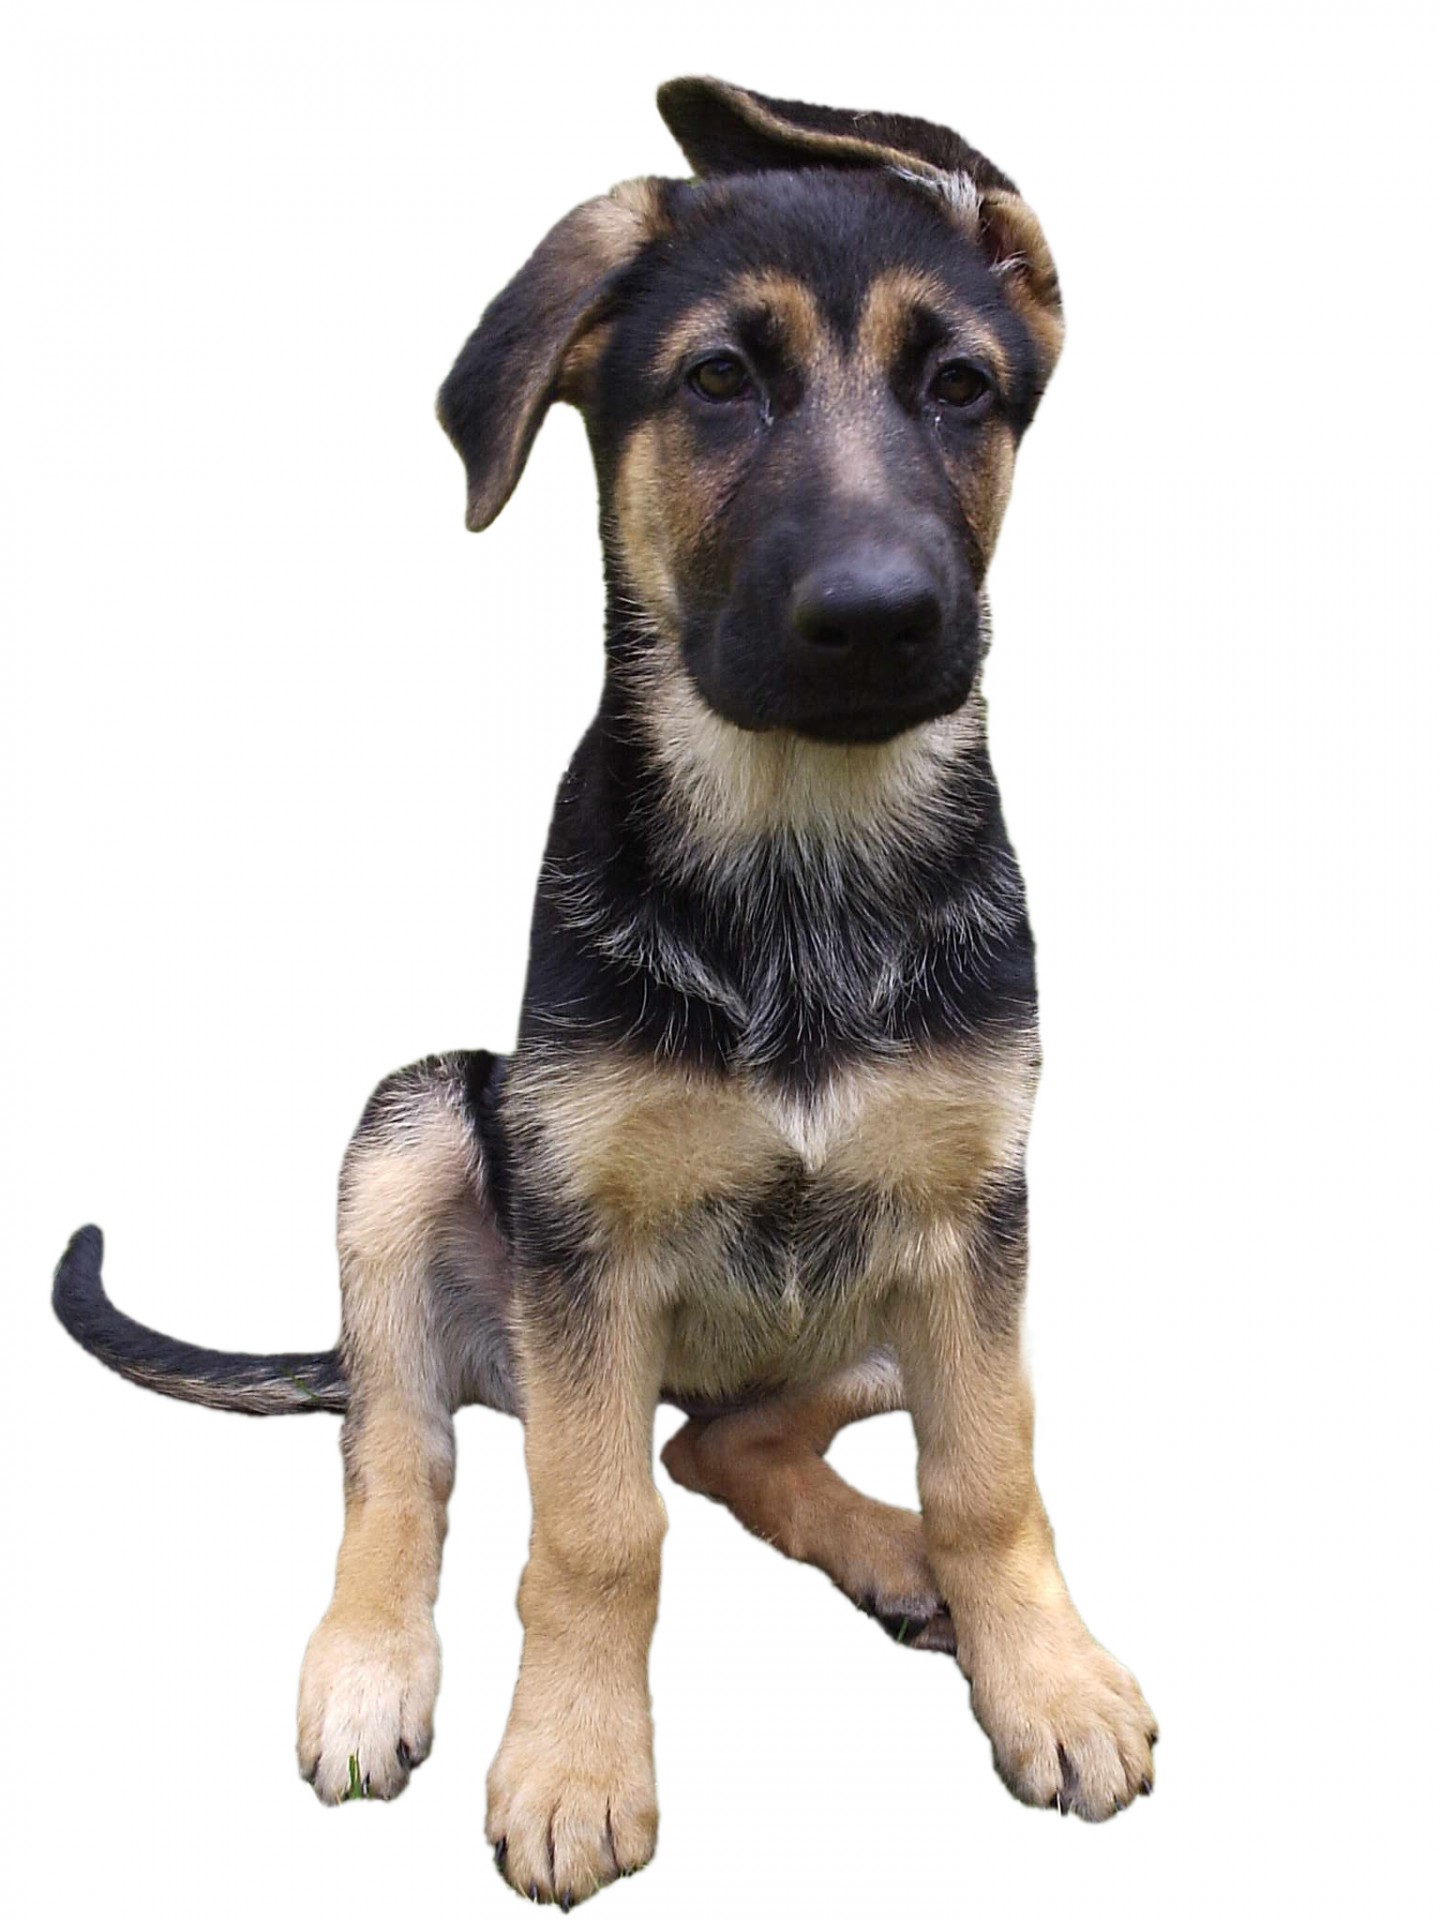 Cute sitting german shepherd puppy dog isolated on a white background